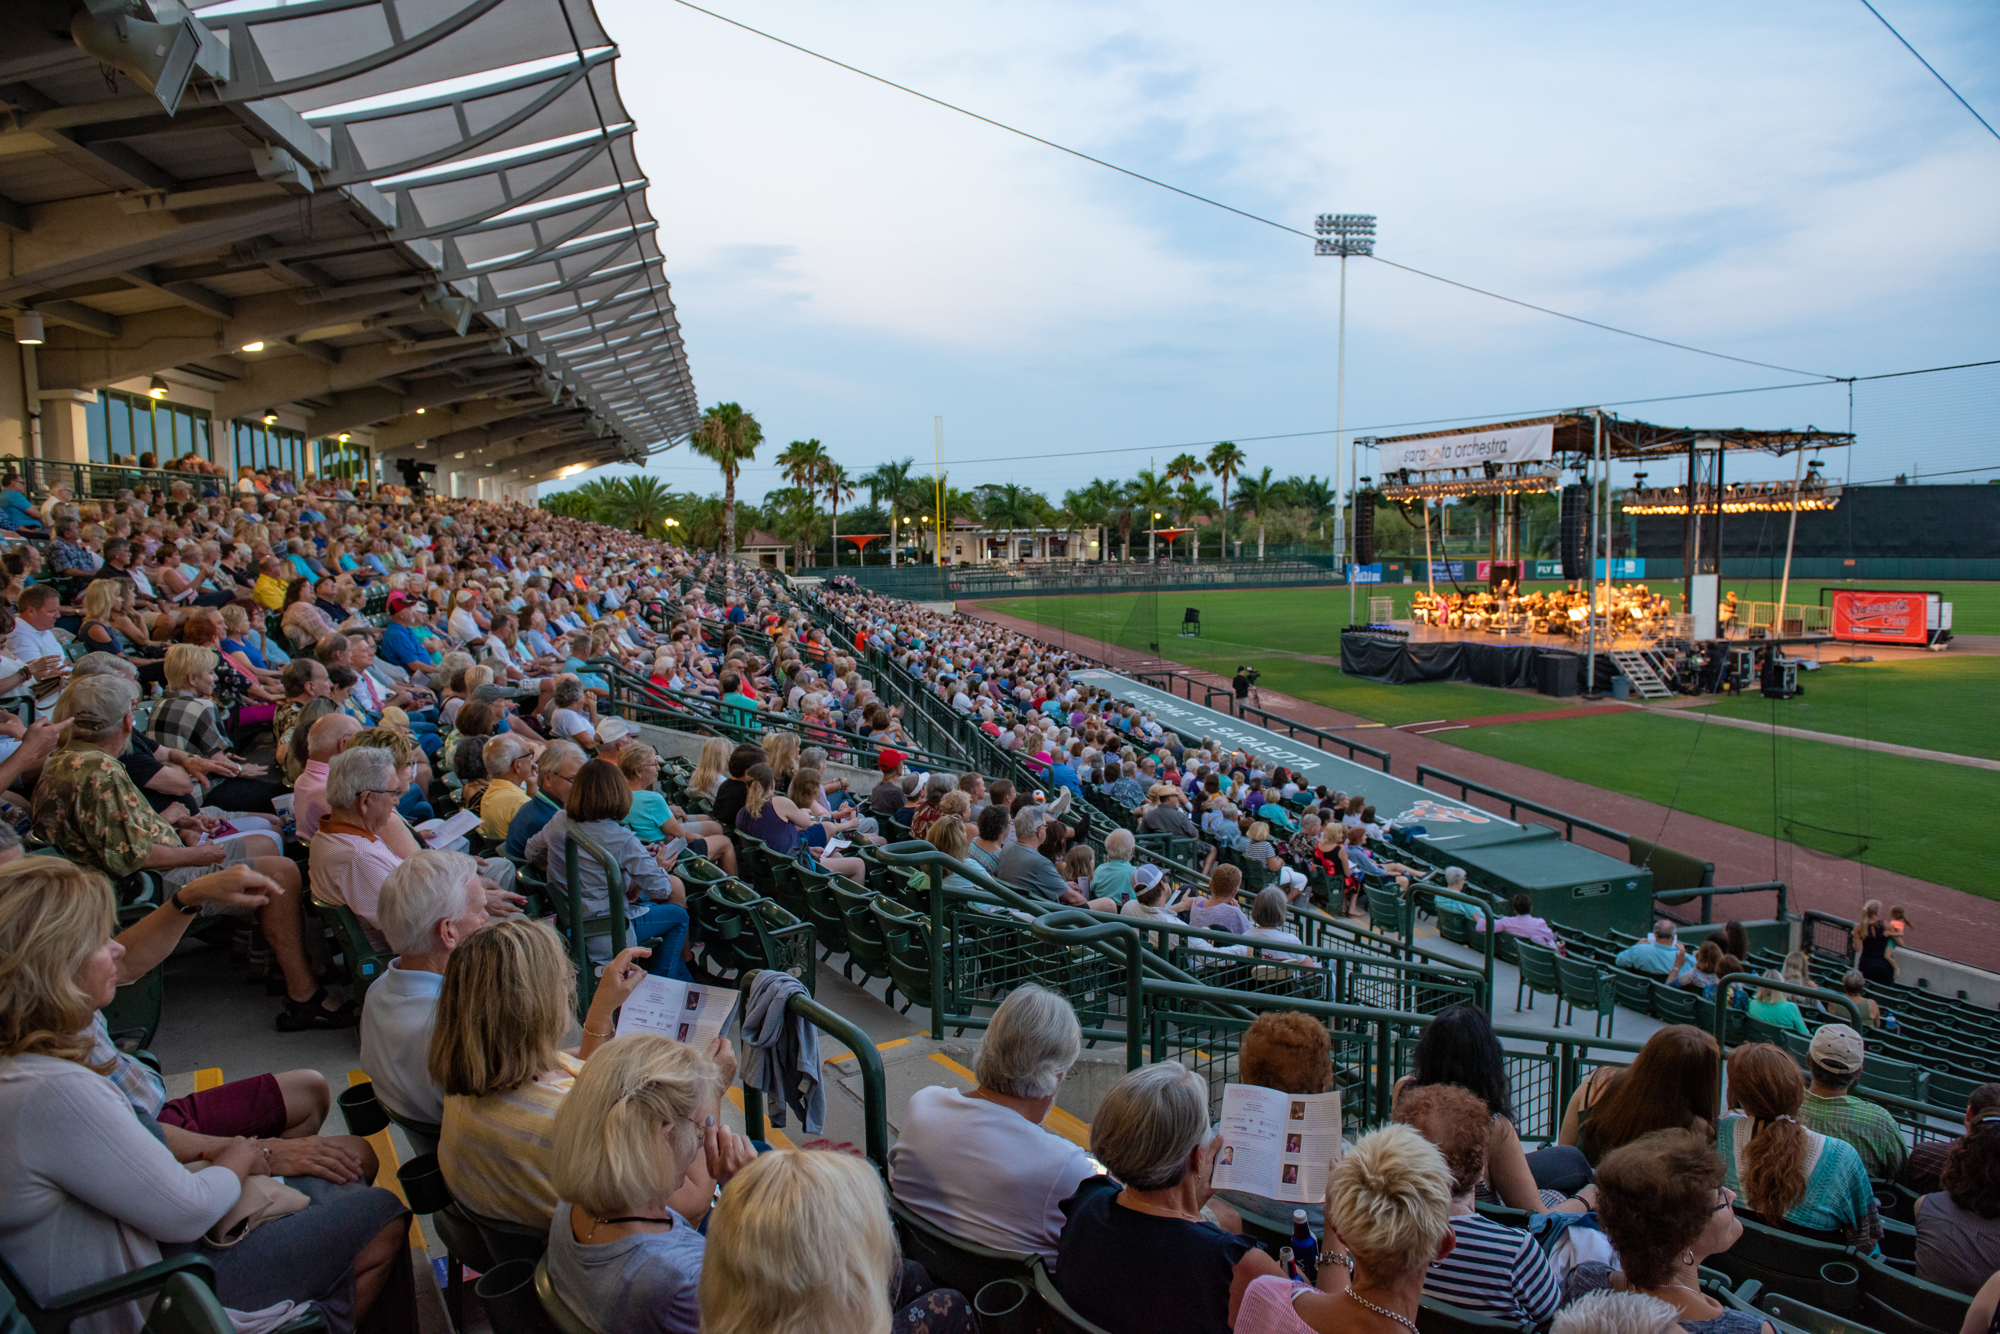 Outdoor Pops presents a different kind of crowd and energy from indoor venues the orchestra performs in on a regular basis. (Courtesy photo)